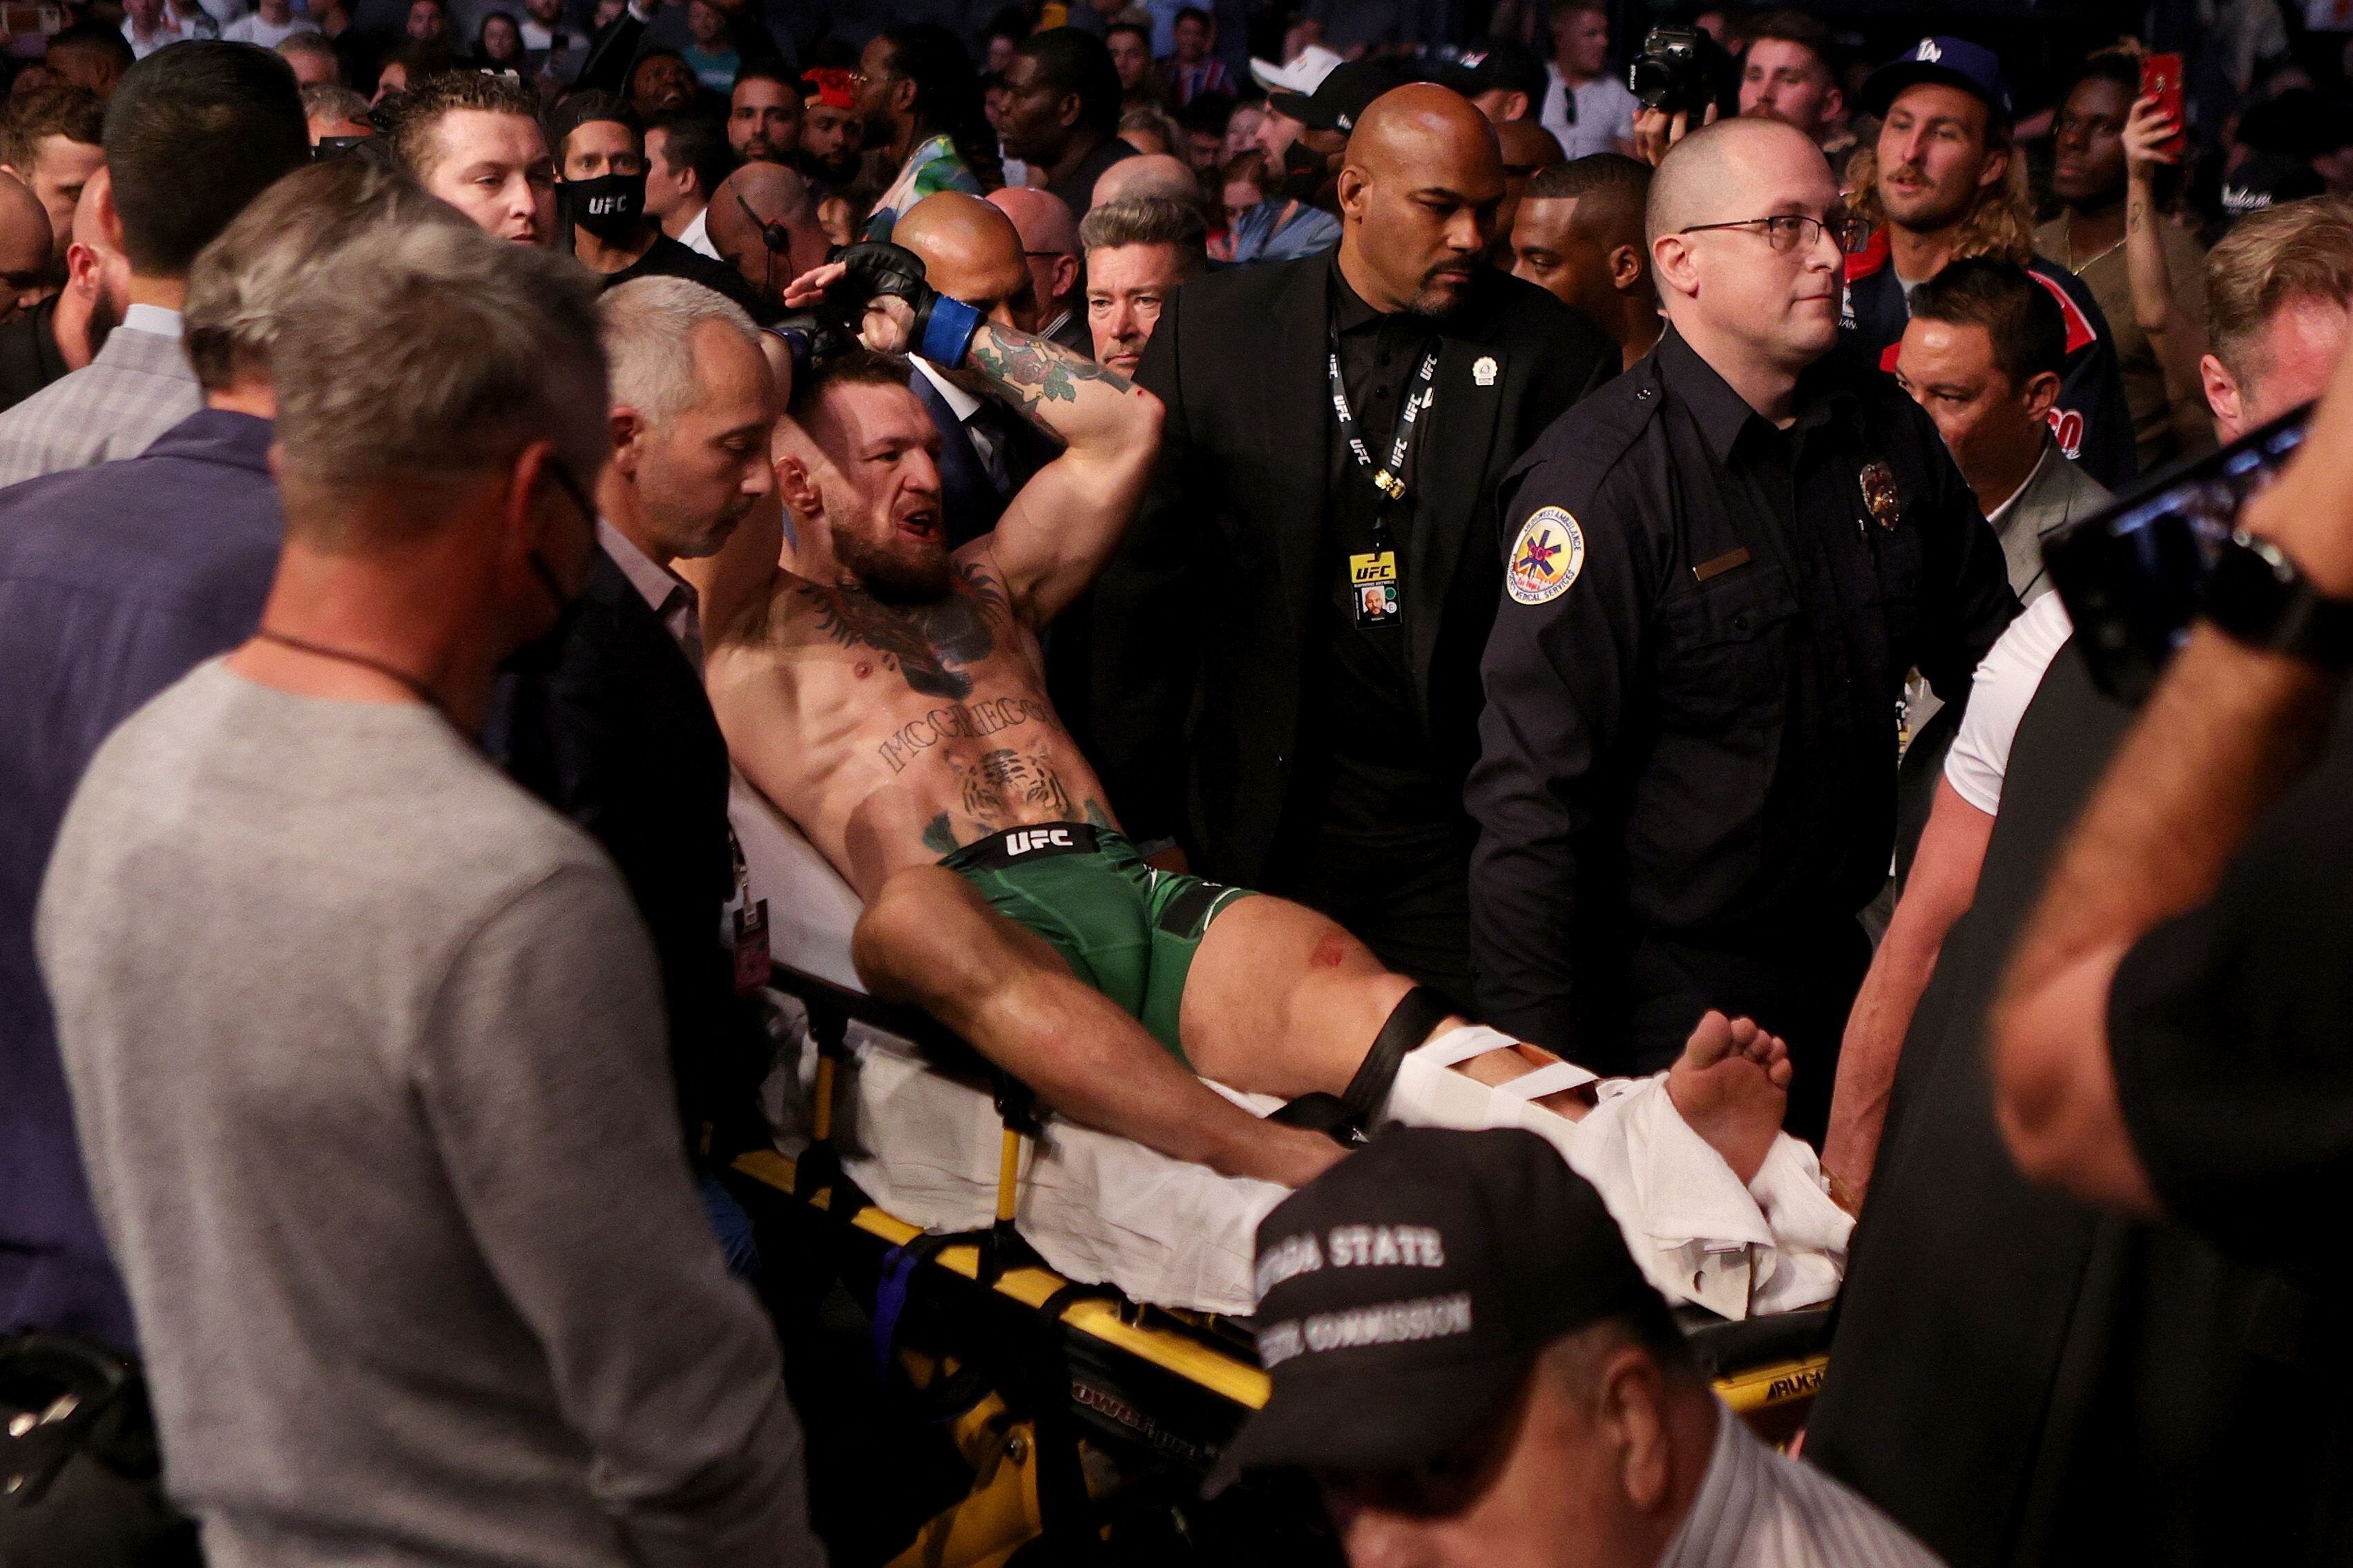 Conor McGregor is carried out of the arena on a stretcher after breaking his leg against Dustin Poirier at UFC 264. Photo: AFP